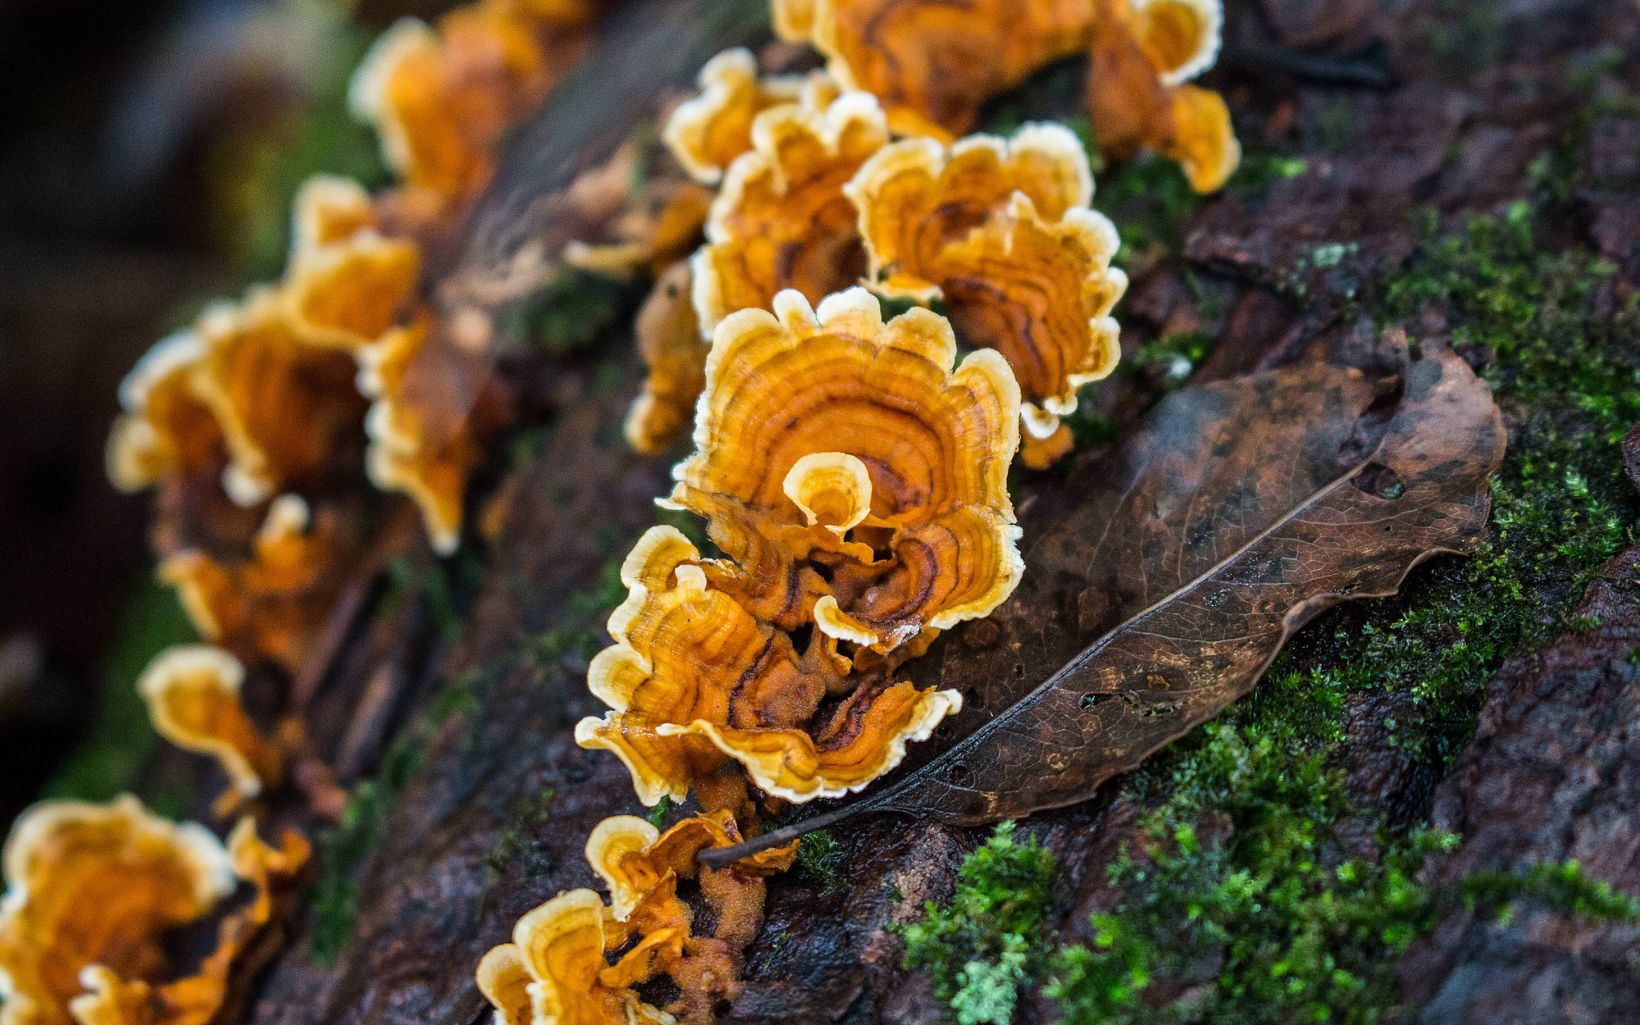 Turkey Tail Fungus (Trametes versicolor) Common in all parts of Ohio, but always stunning to see the wide range of colors displayed. © Emily Speelman